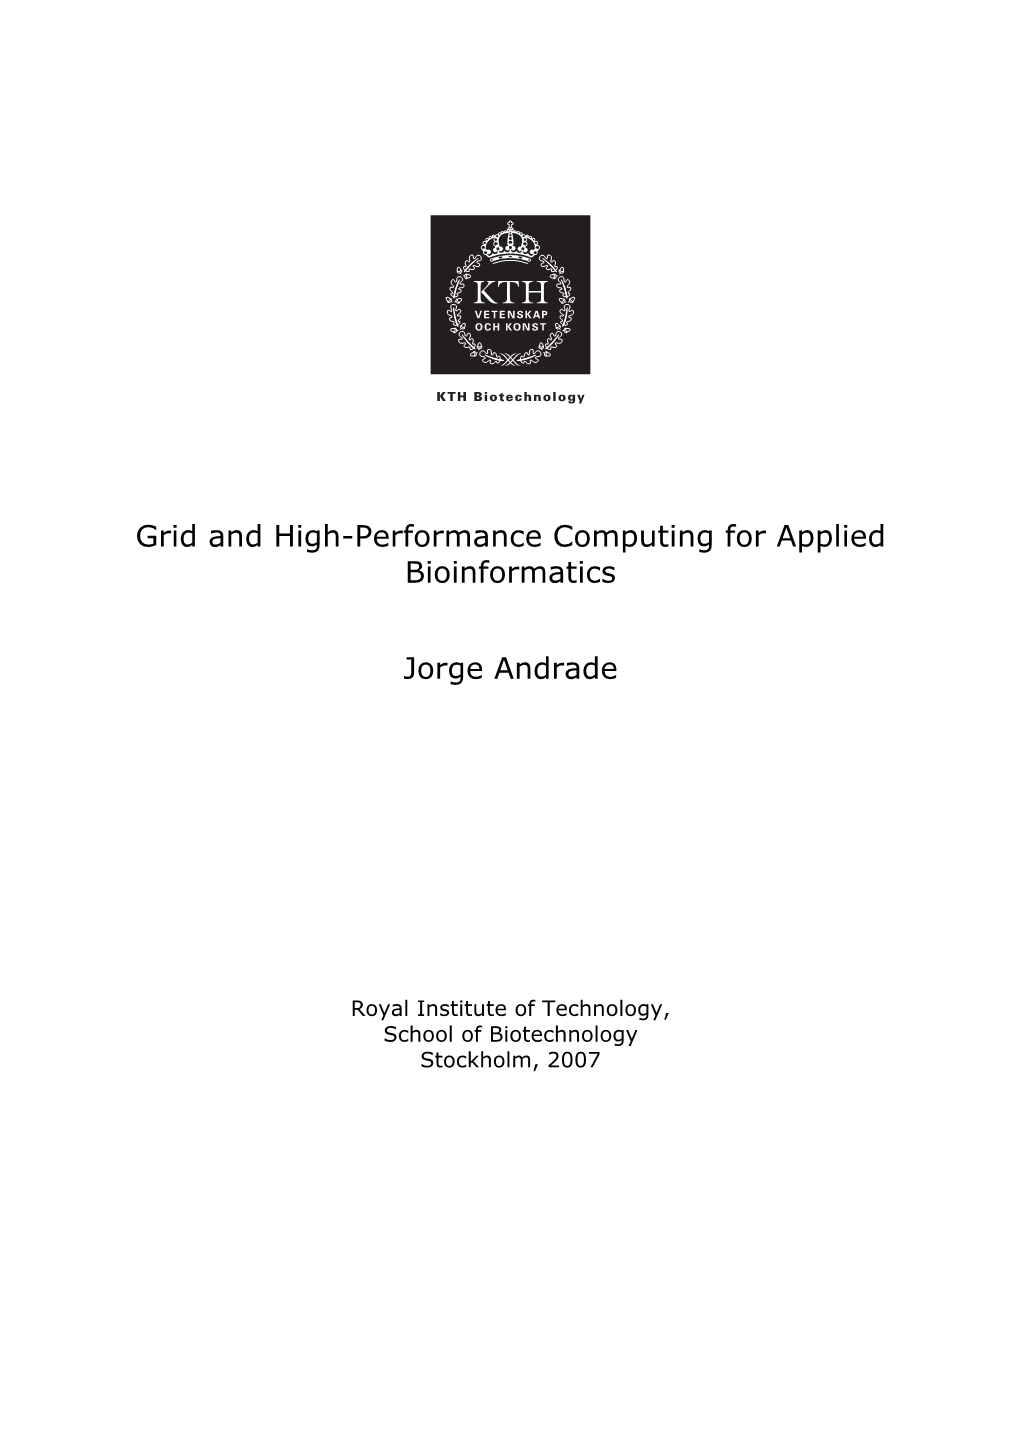 Grid and High-Performance Computing for Applied Bioinformatics